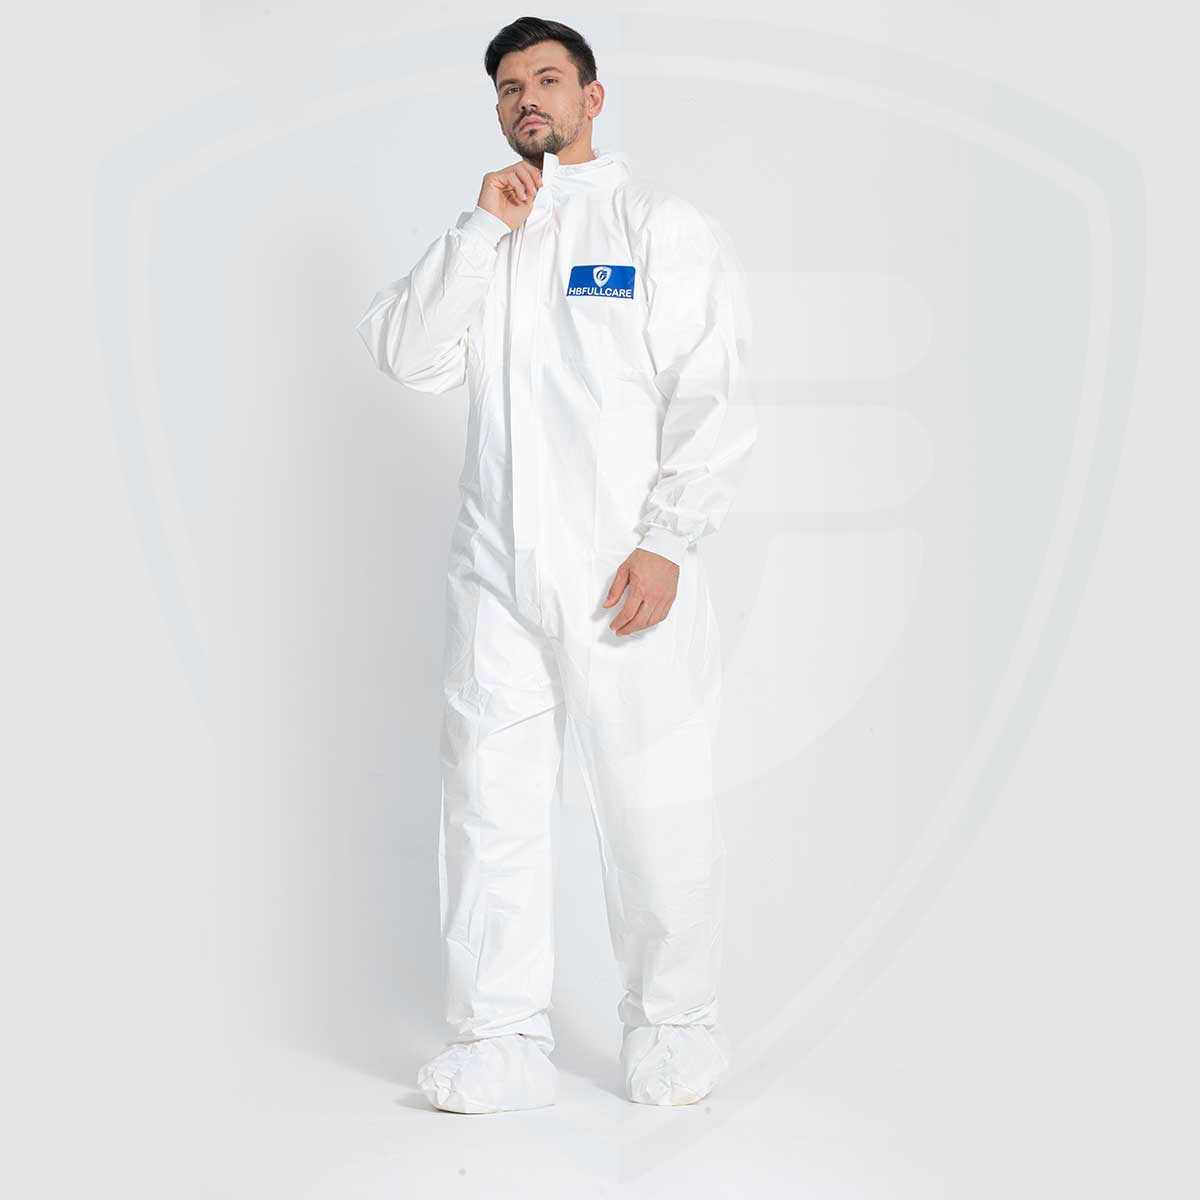 Type 5/6 Spray Painting Protective Disposable Coveralls Safety WorkWear White